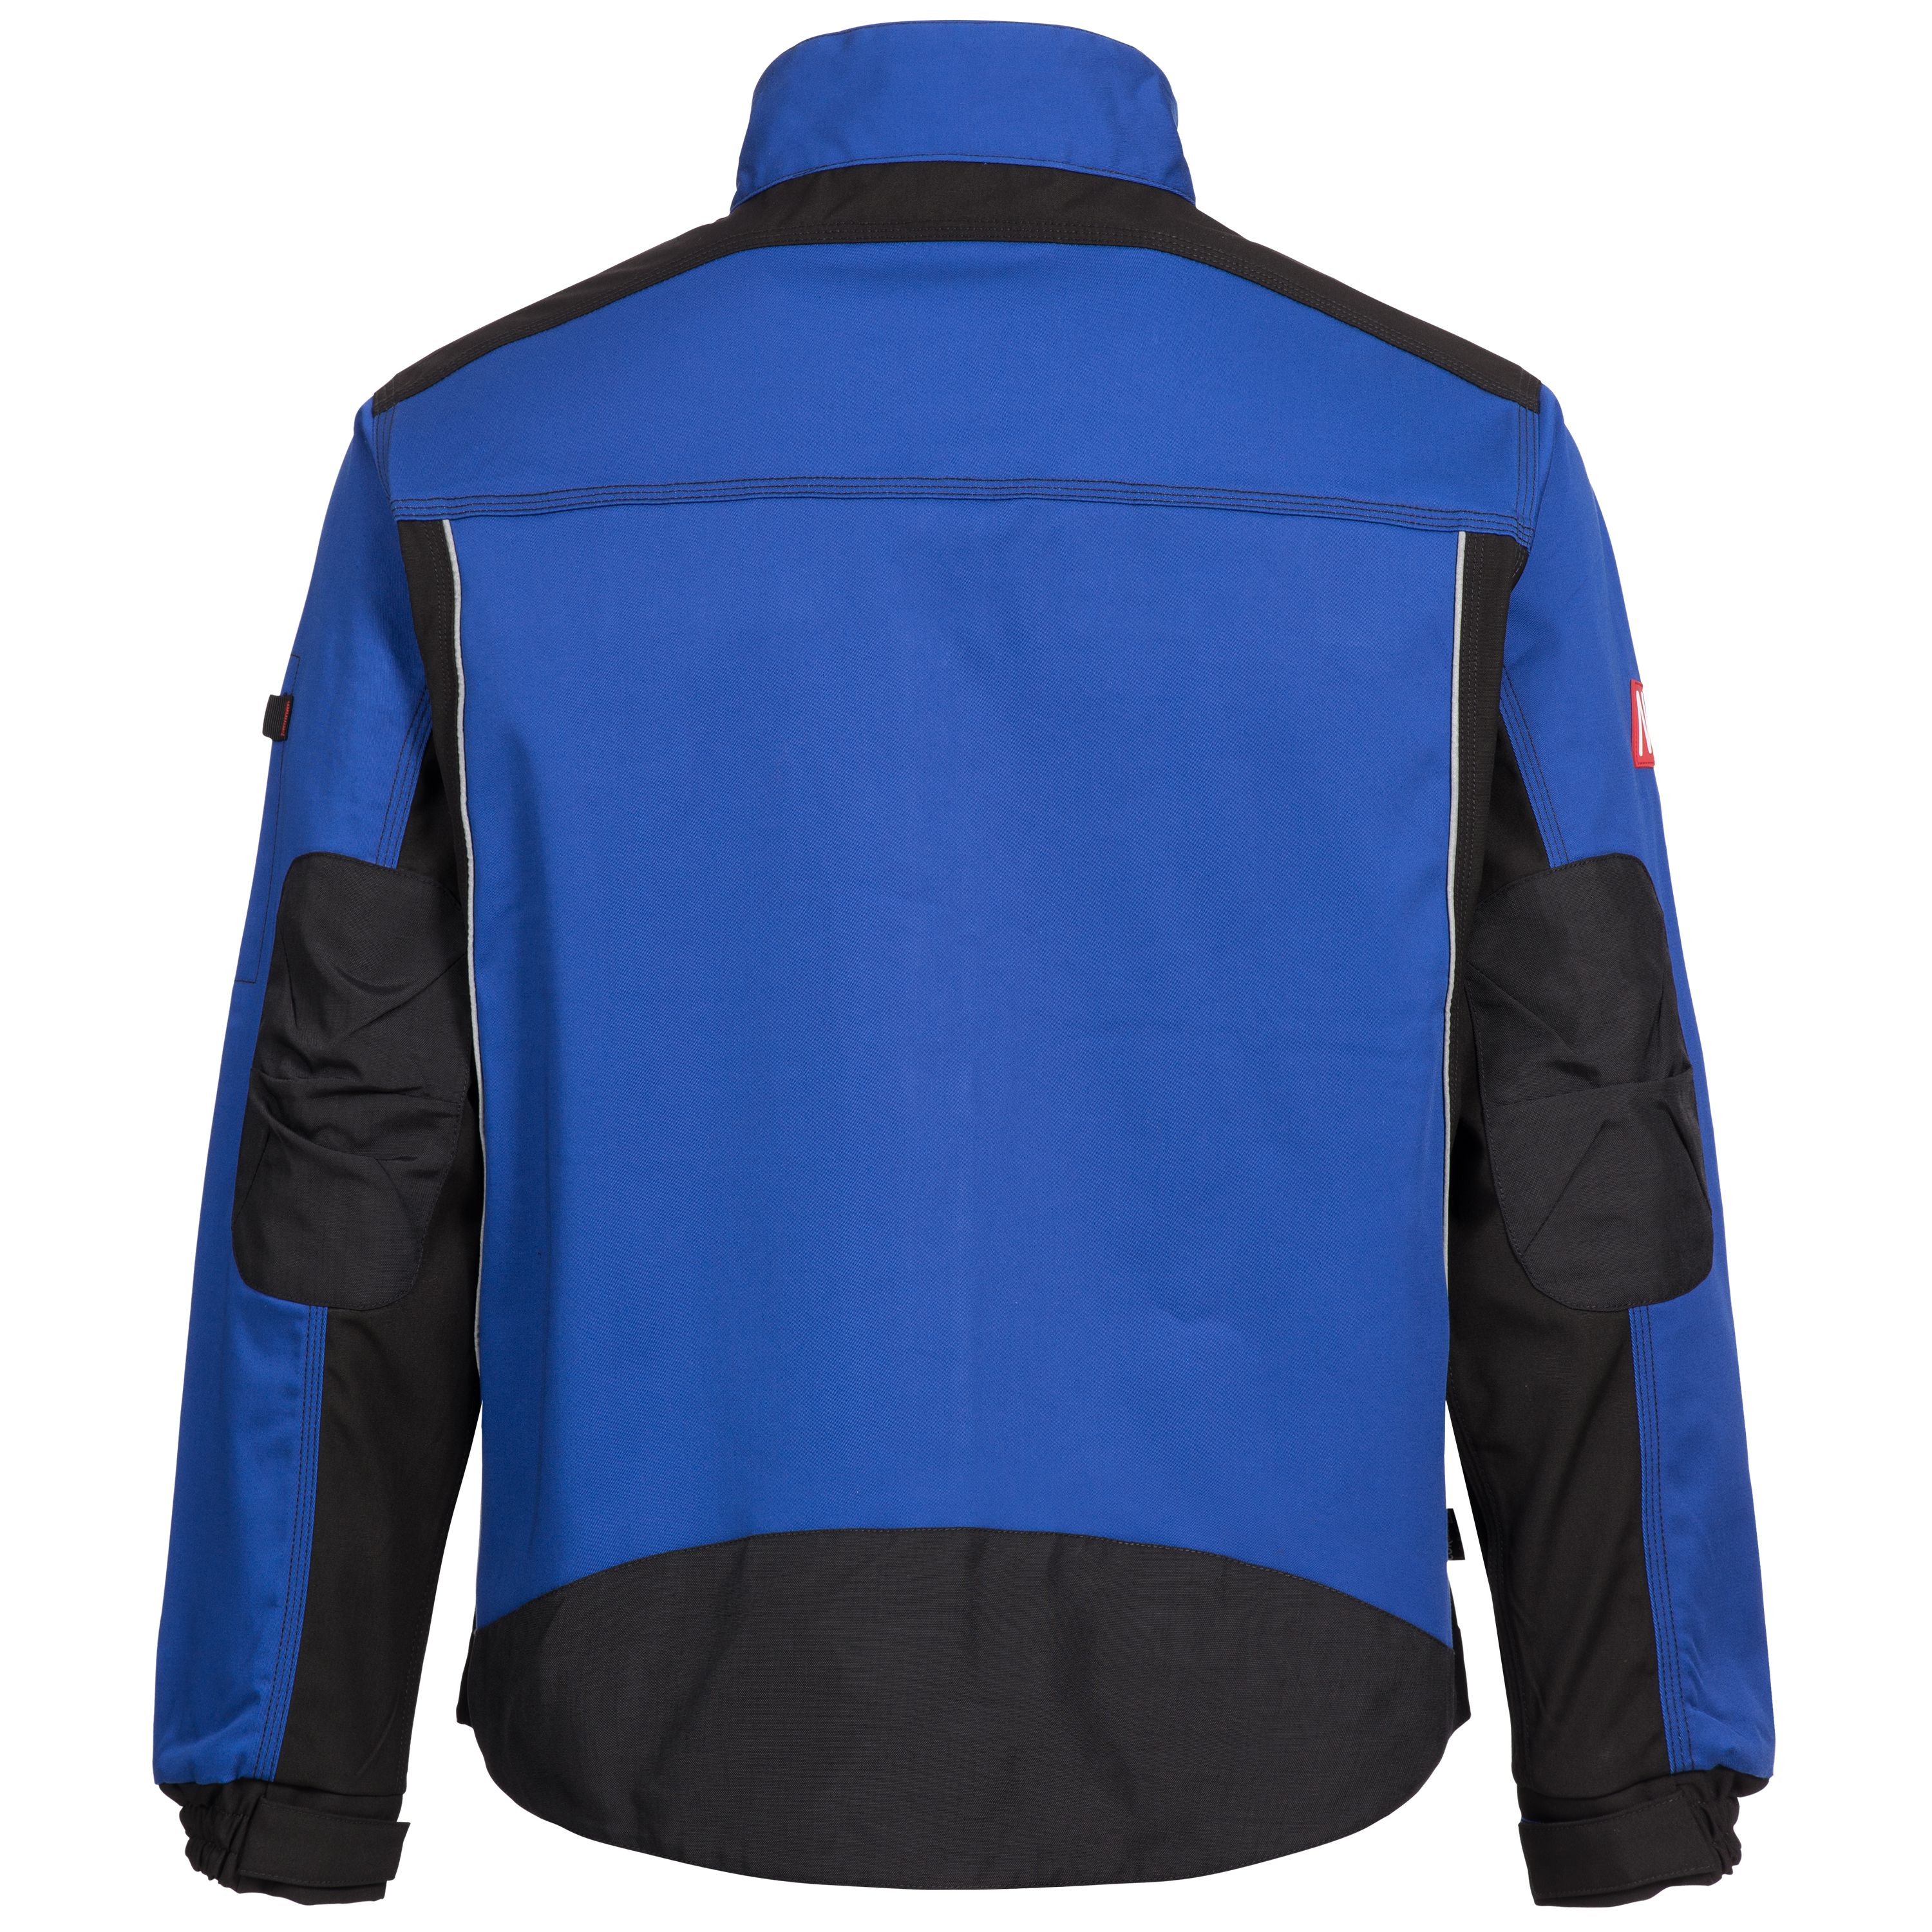 Nitras Motion Tex Pro FX 7751 Waistband Jacket for Work - Blue - 42